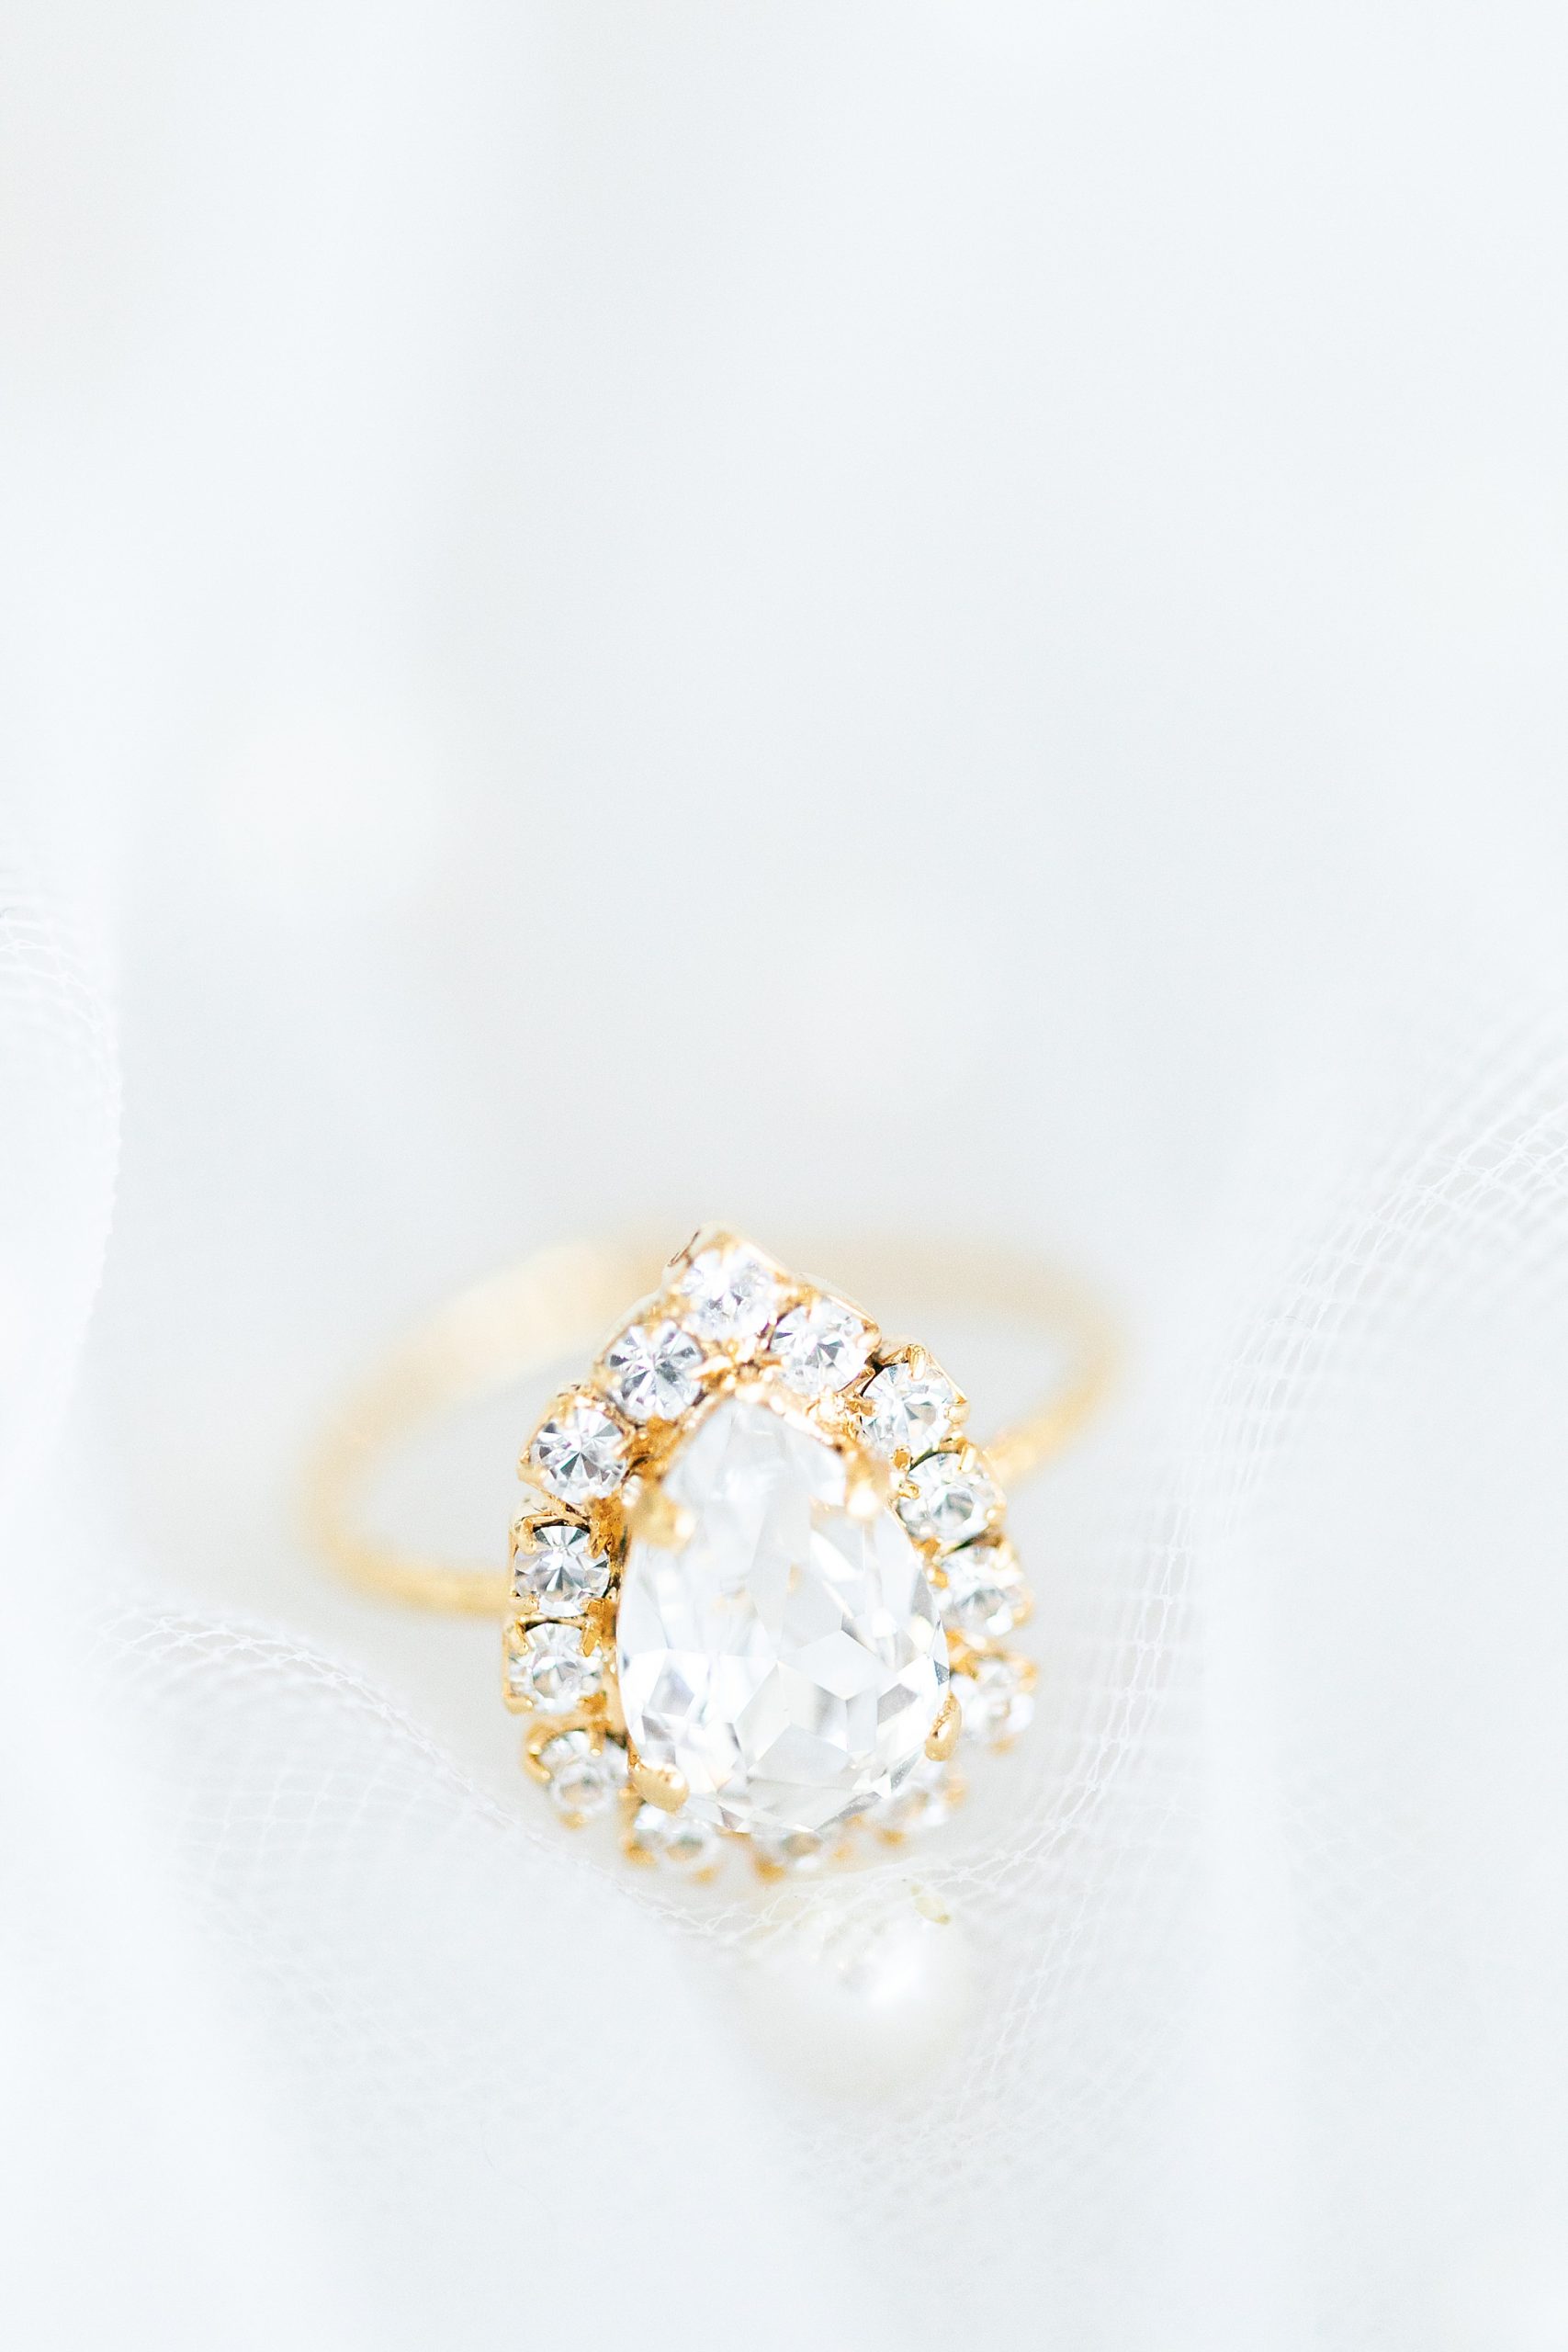 bride's pear shaped ring with diamonds